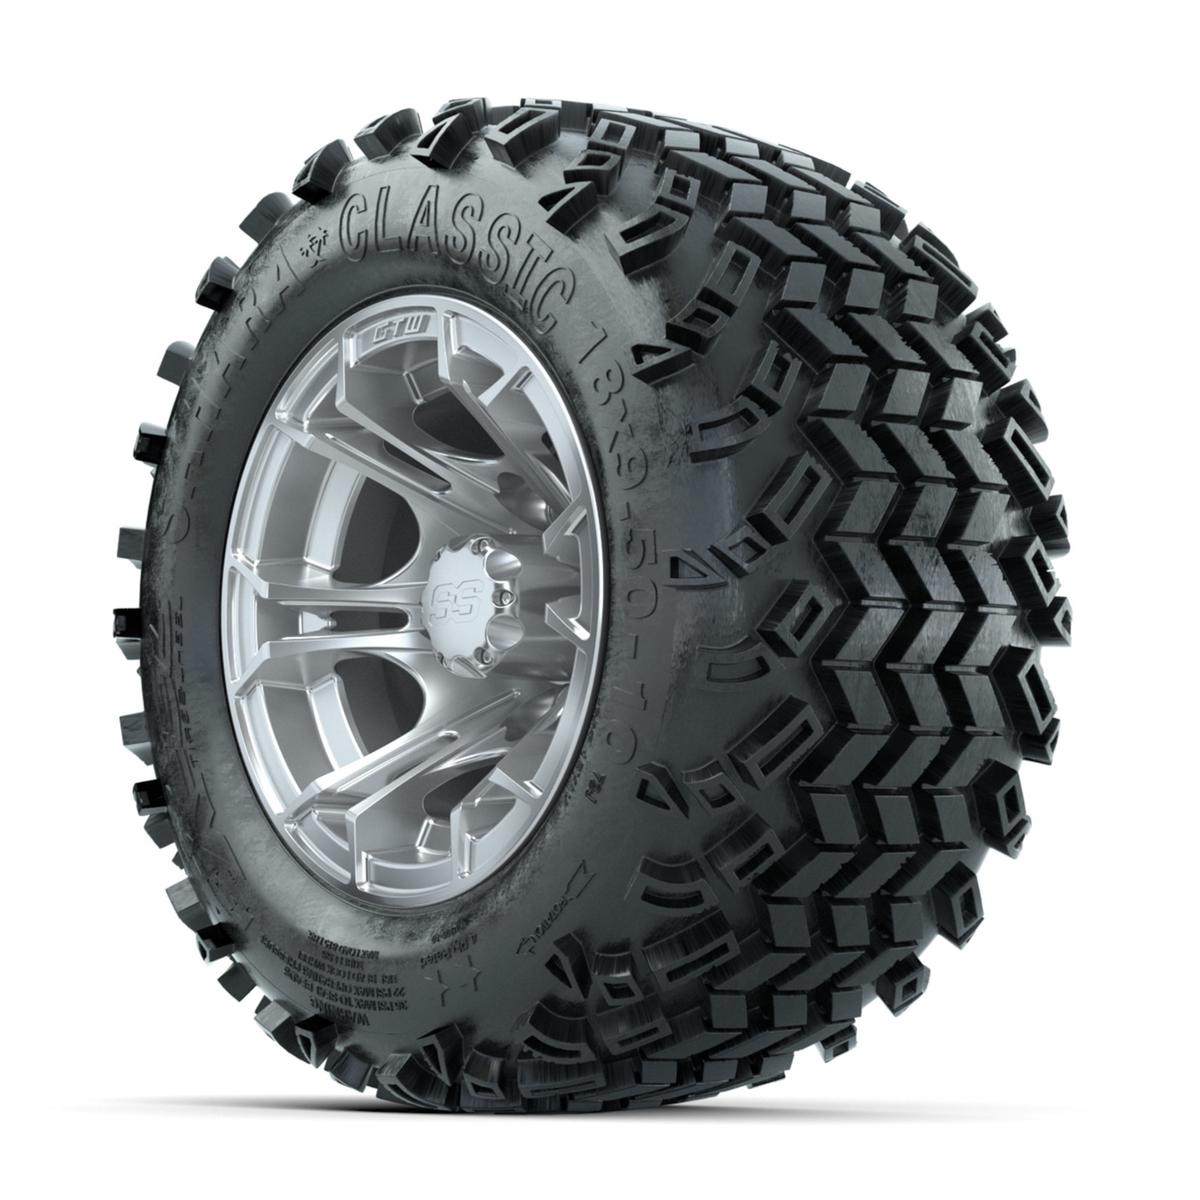 GTW Spyder Silver Brush 10 in Wheels with 18x9.50-10 Sahara Classic All Terrain Tires – Full Set